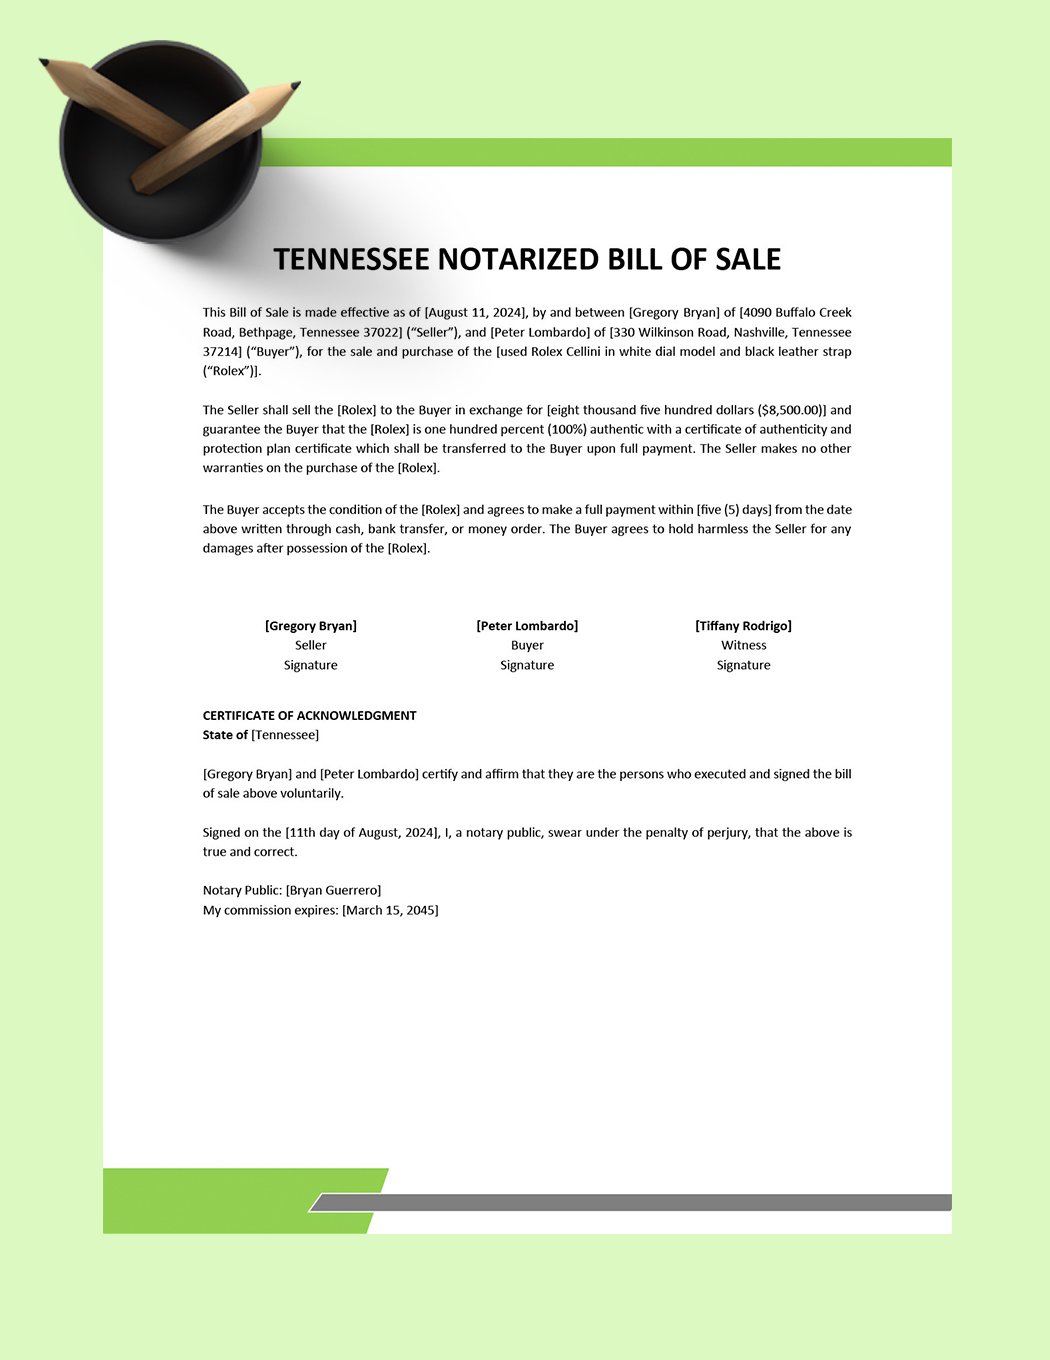 Tennessee Notarized Bill of Sale Form Template